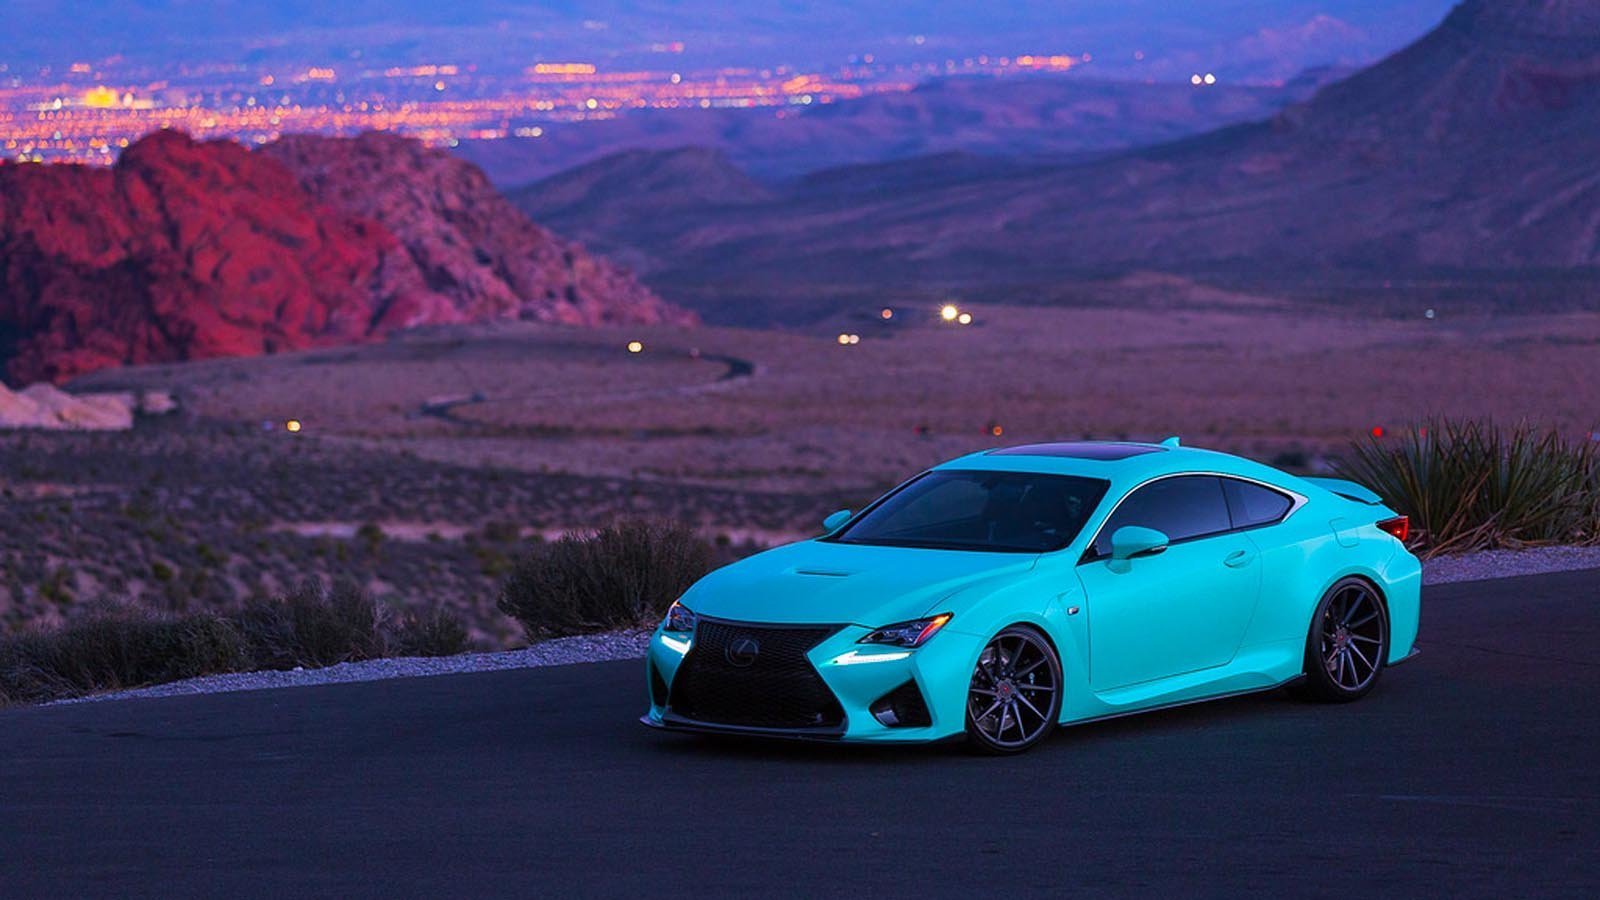 Some of the Best Toyota / Lexus Sports Cars